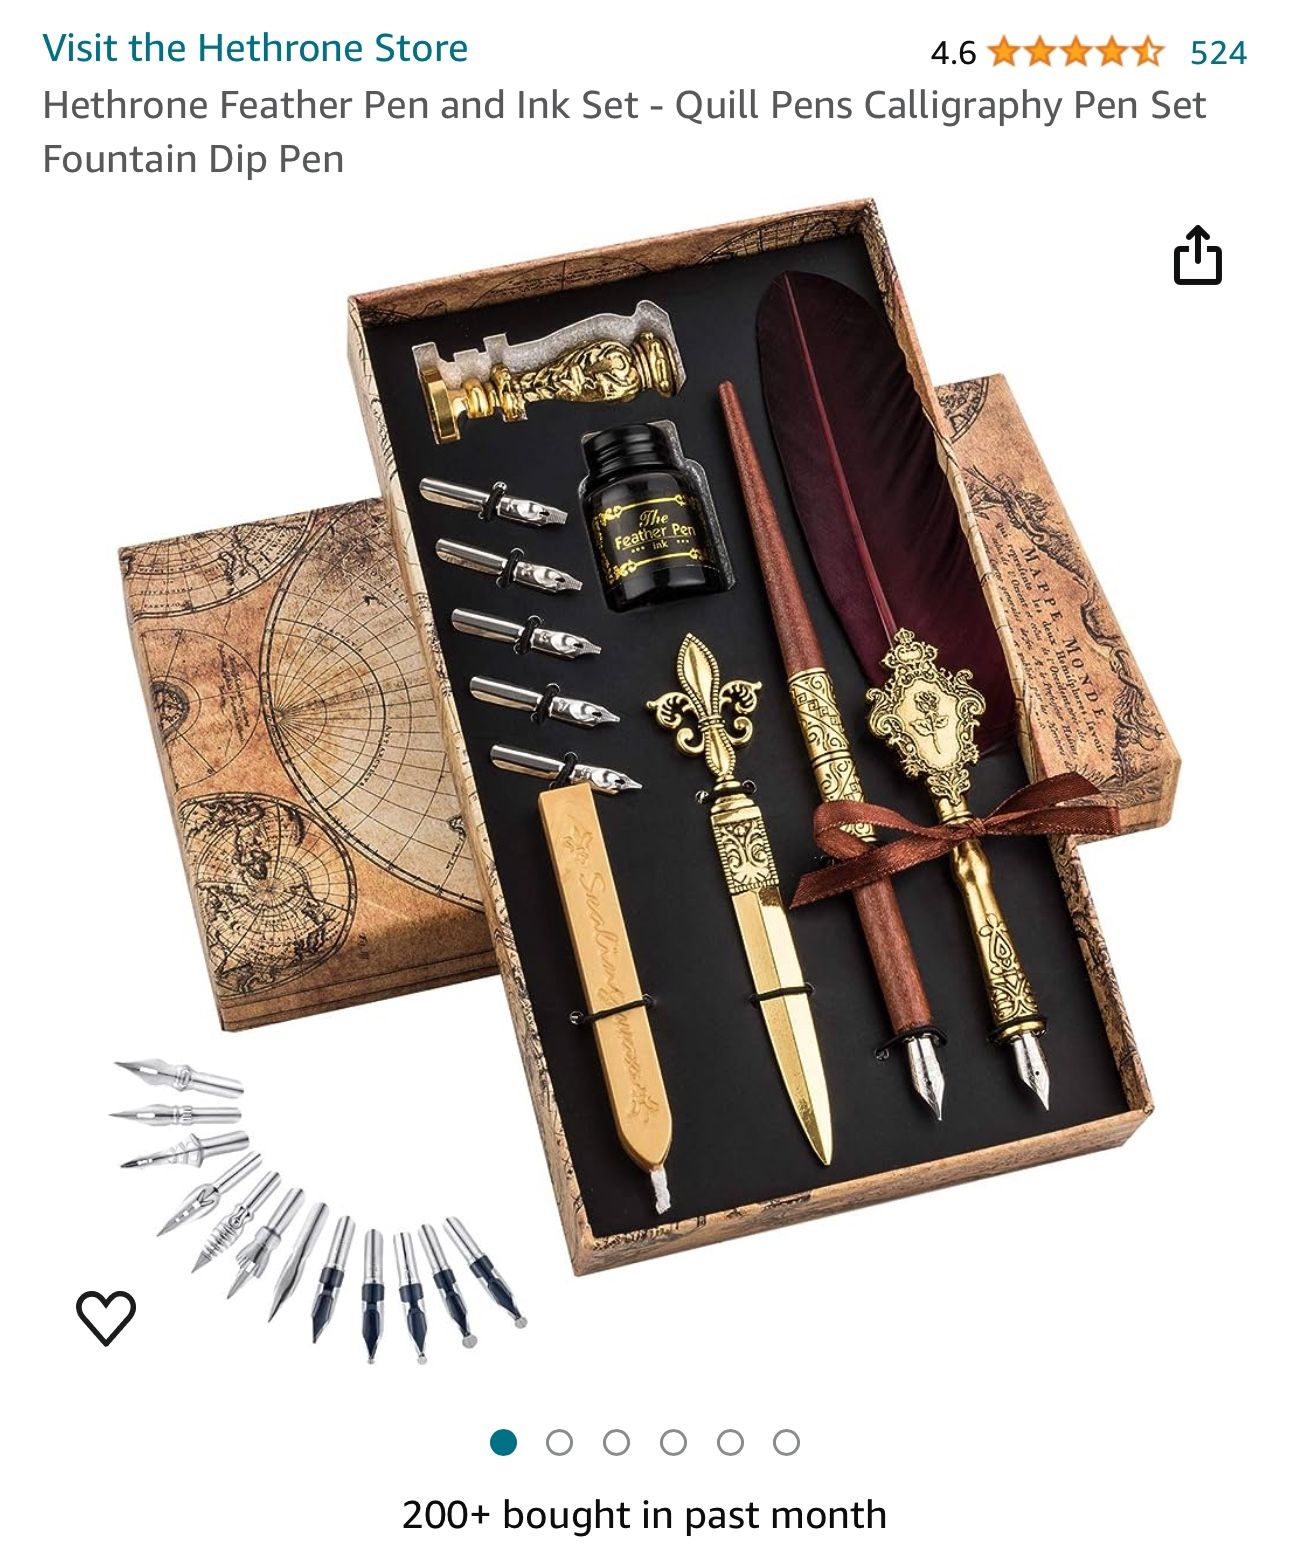 Feather Pen and Ink Set - Quill Pens Calligraphy Pen Set Fountain Dip Pen